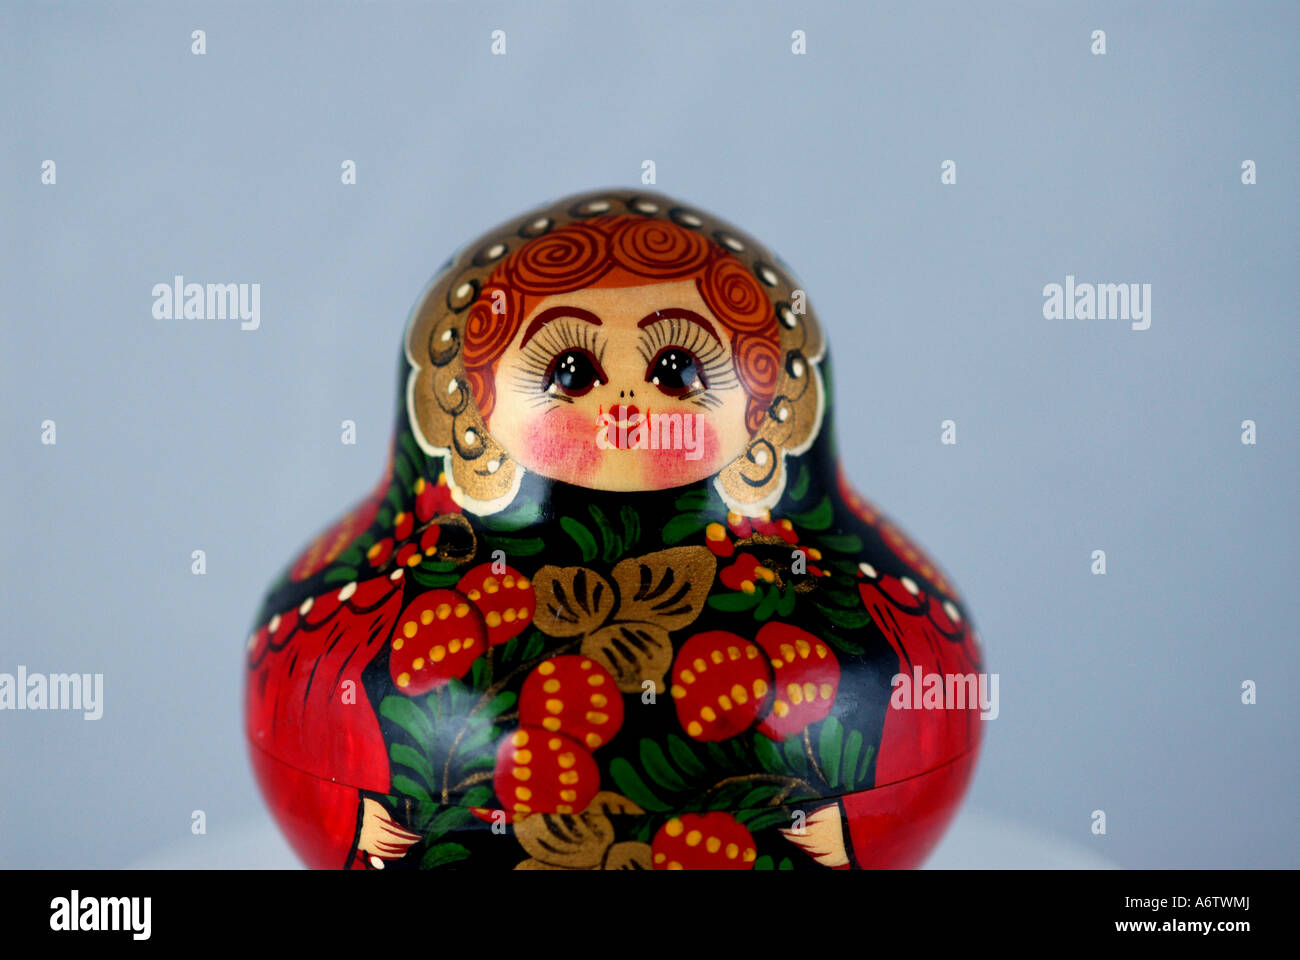 Russian nesting doll red squat painted flowers iconic russian souvenir moscow Stock Photo